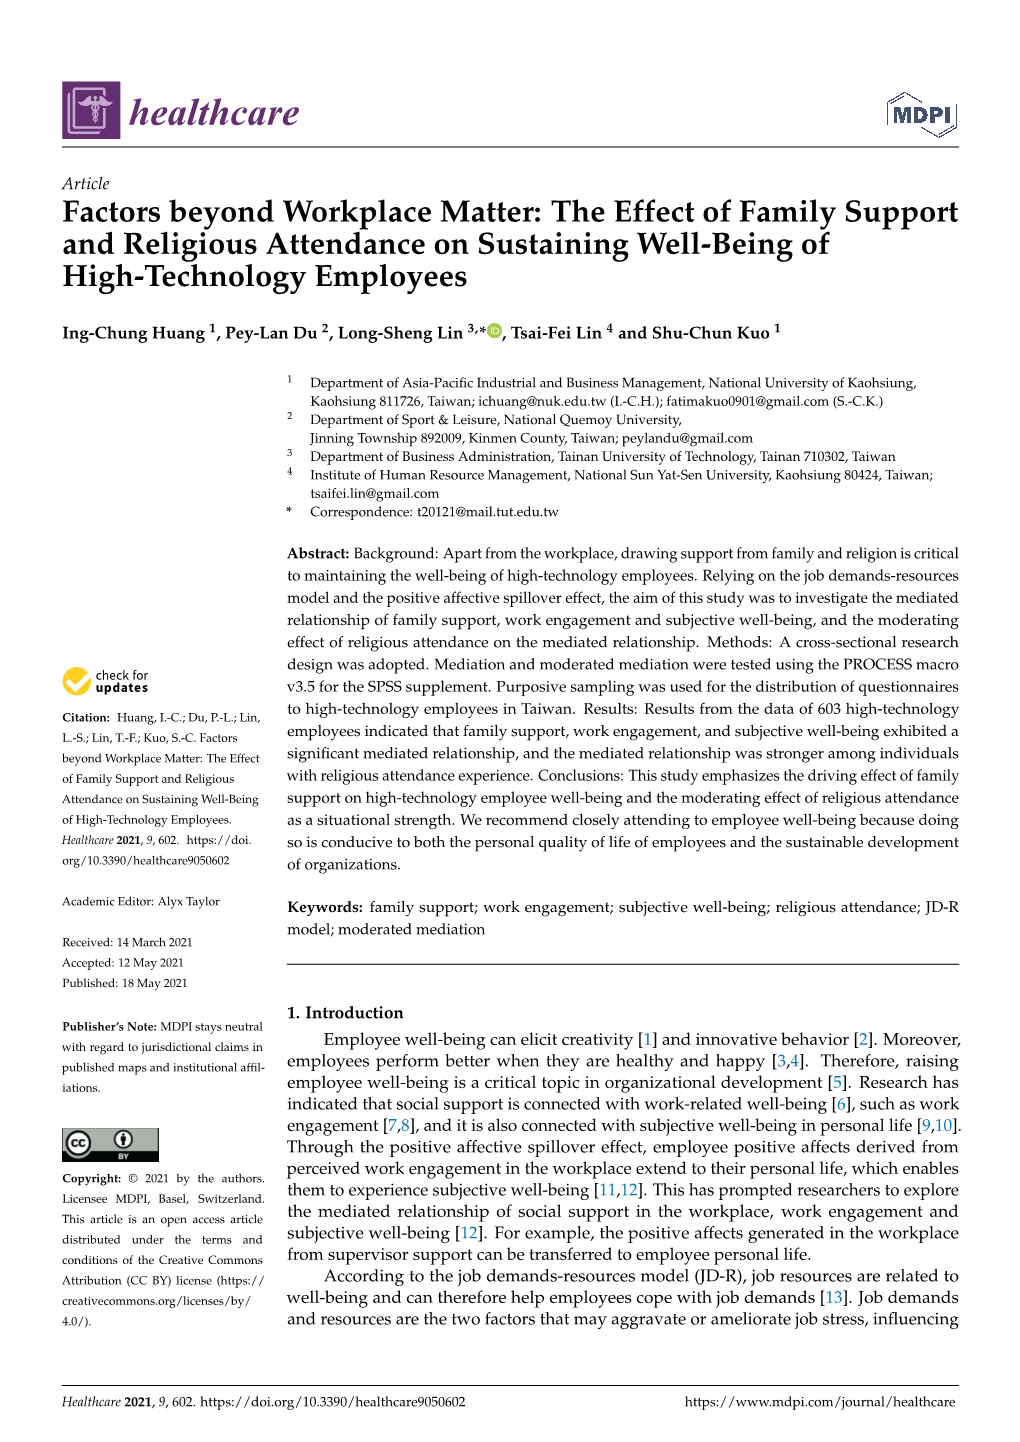 The Effect of Family Support and Religious Attendance on Sustaining Well-Being of High-Technology Employees